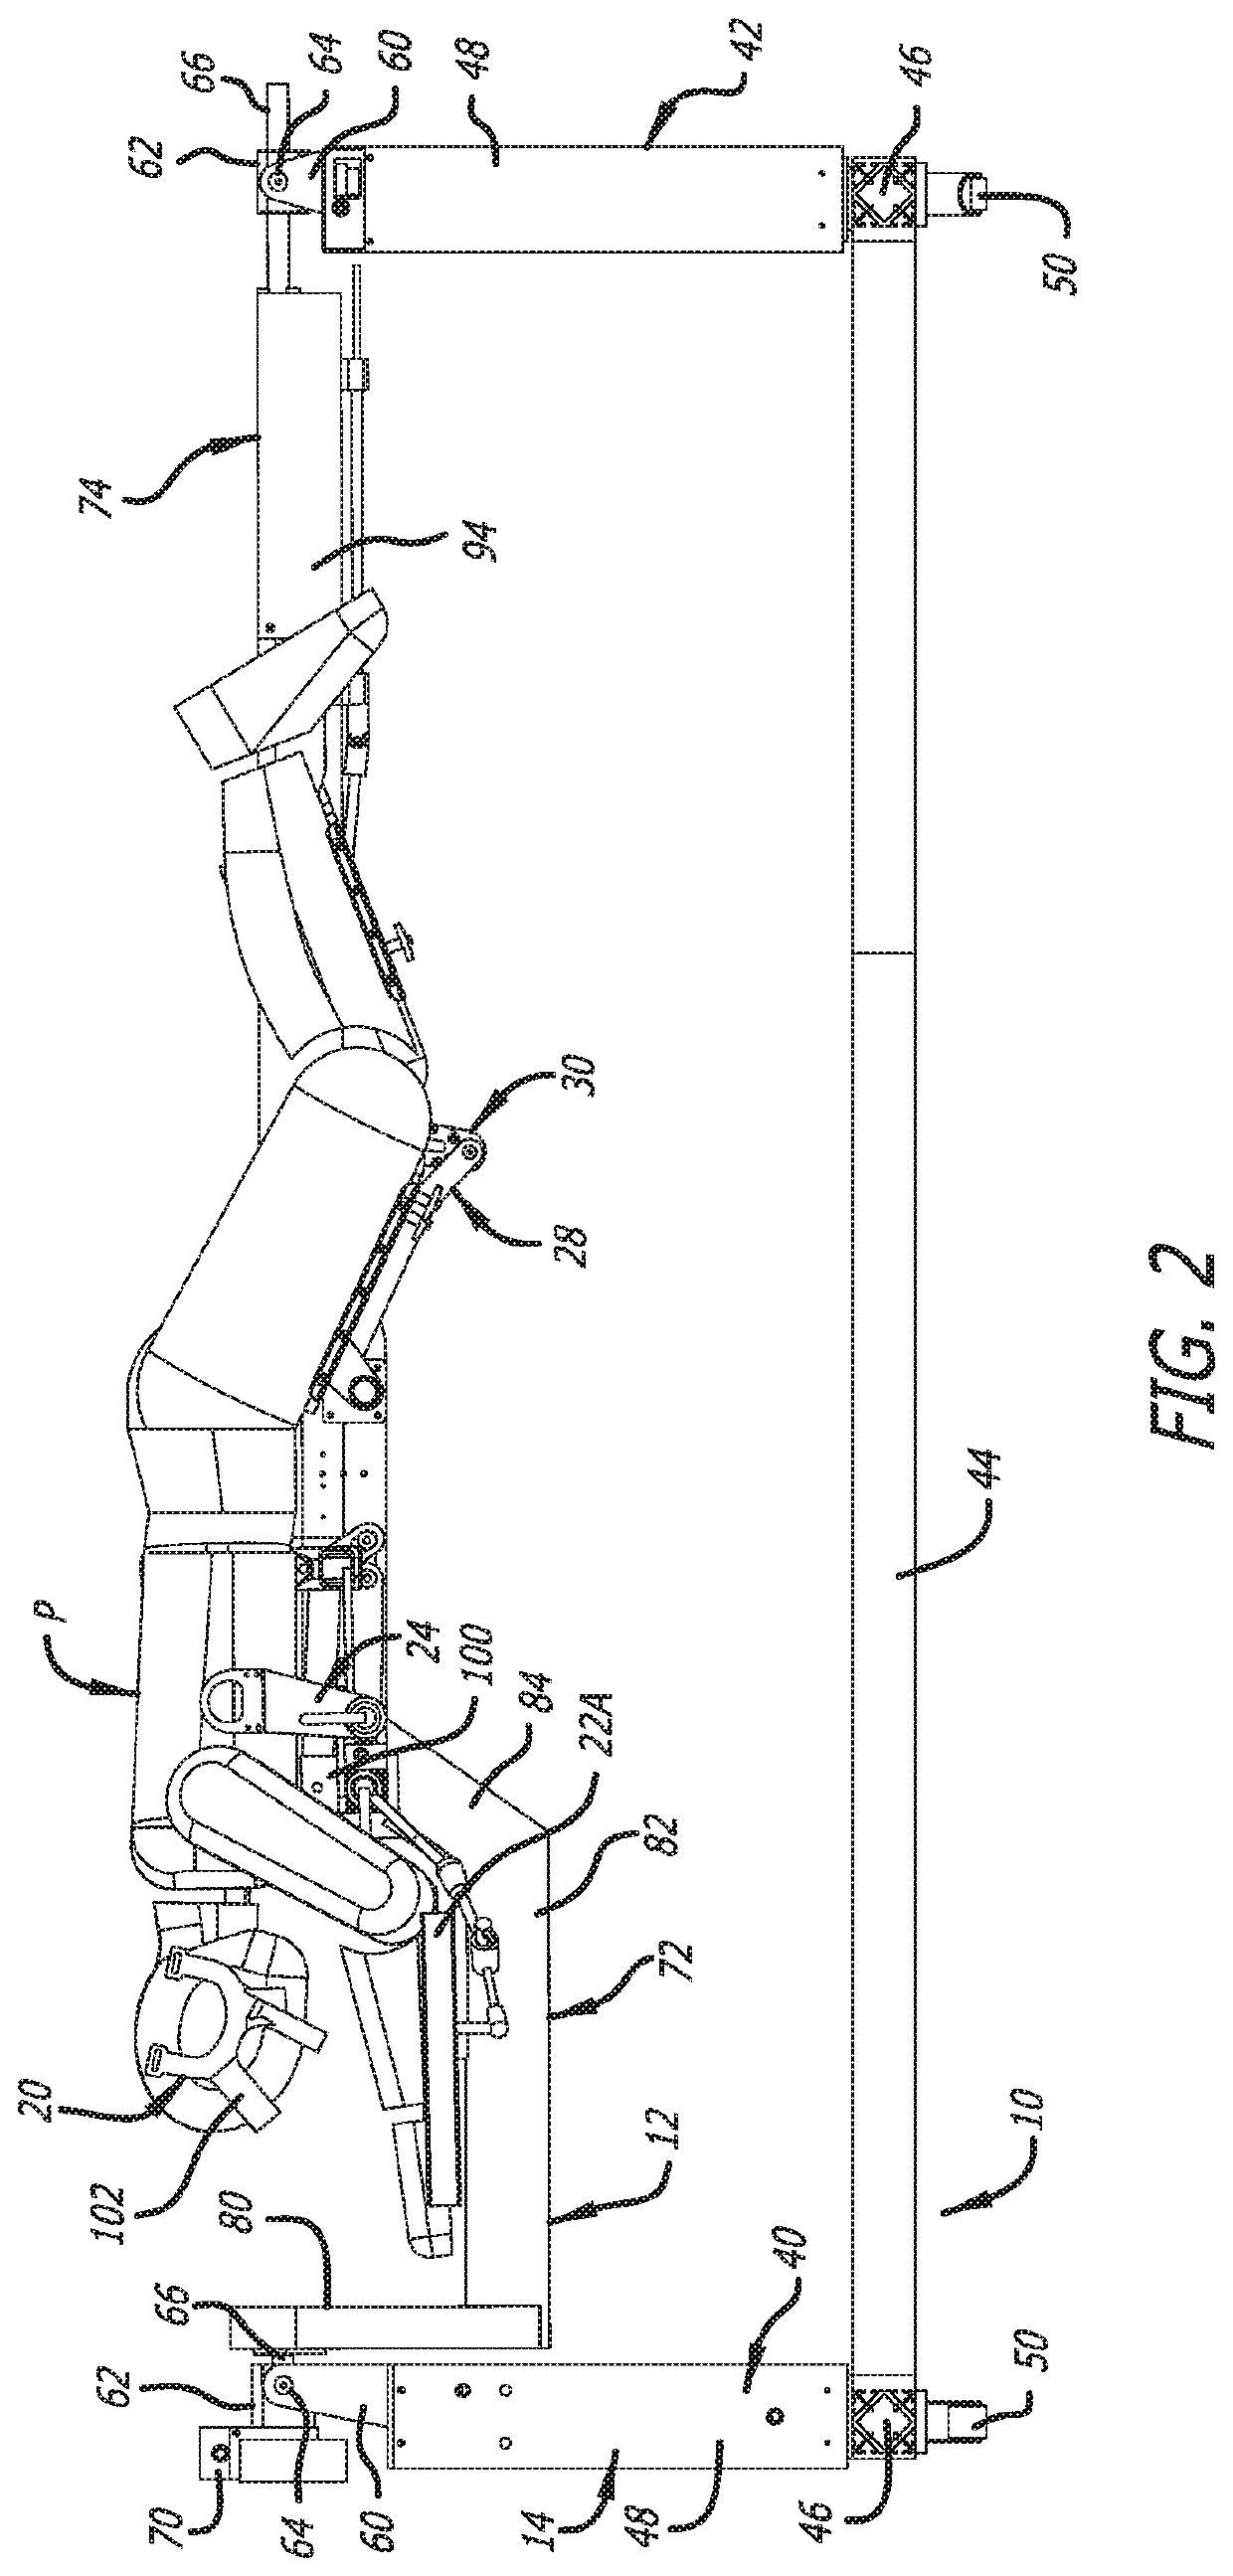 Surgical frame having translating lower beam and moveable linkage or surgical equipment attached thereto and method for use thereof